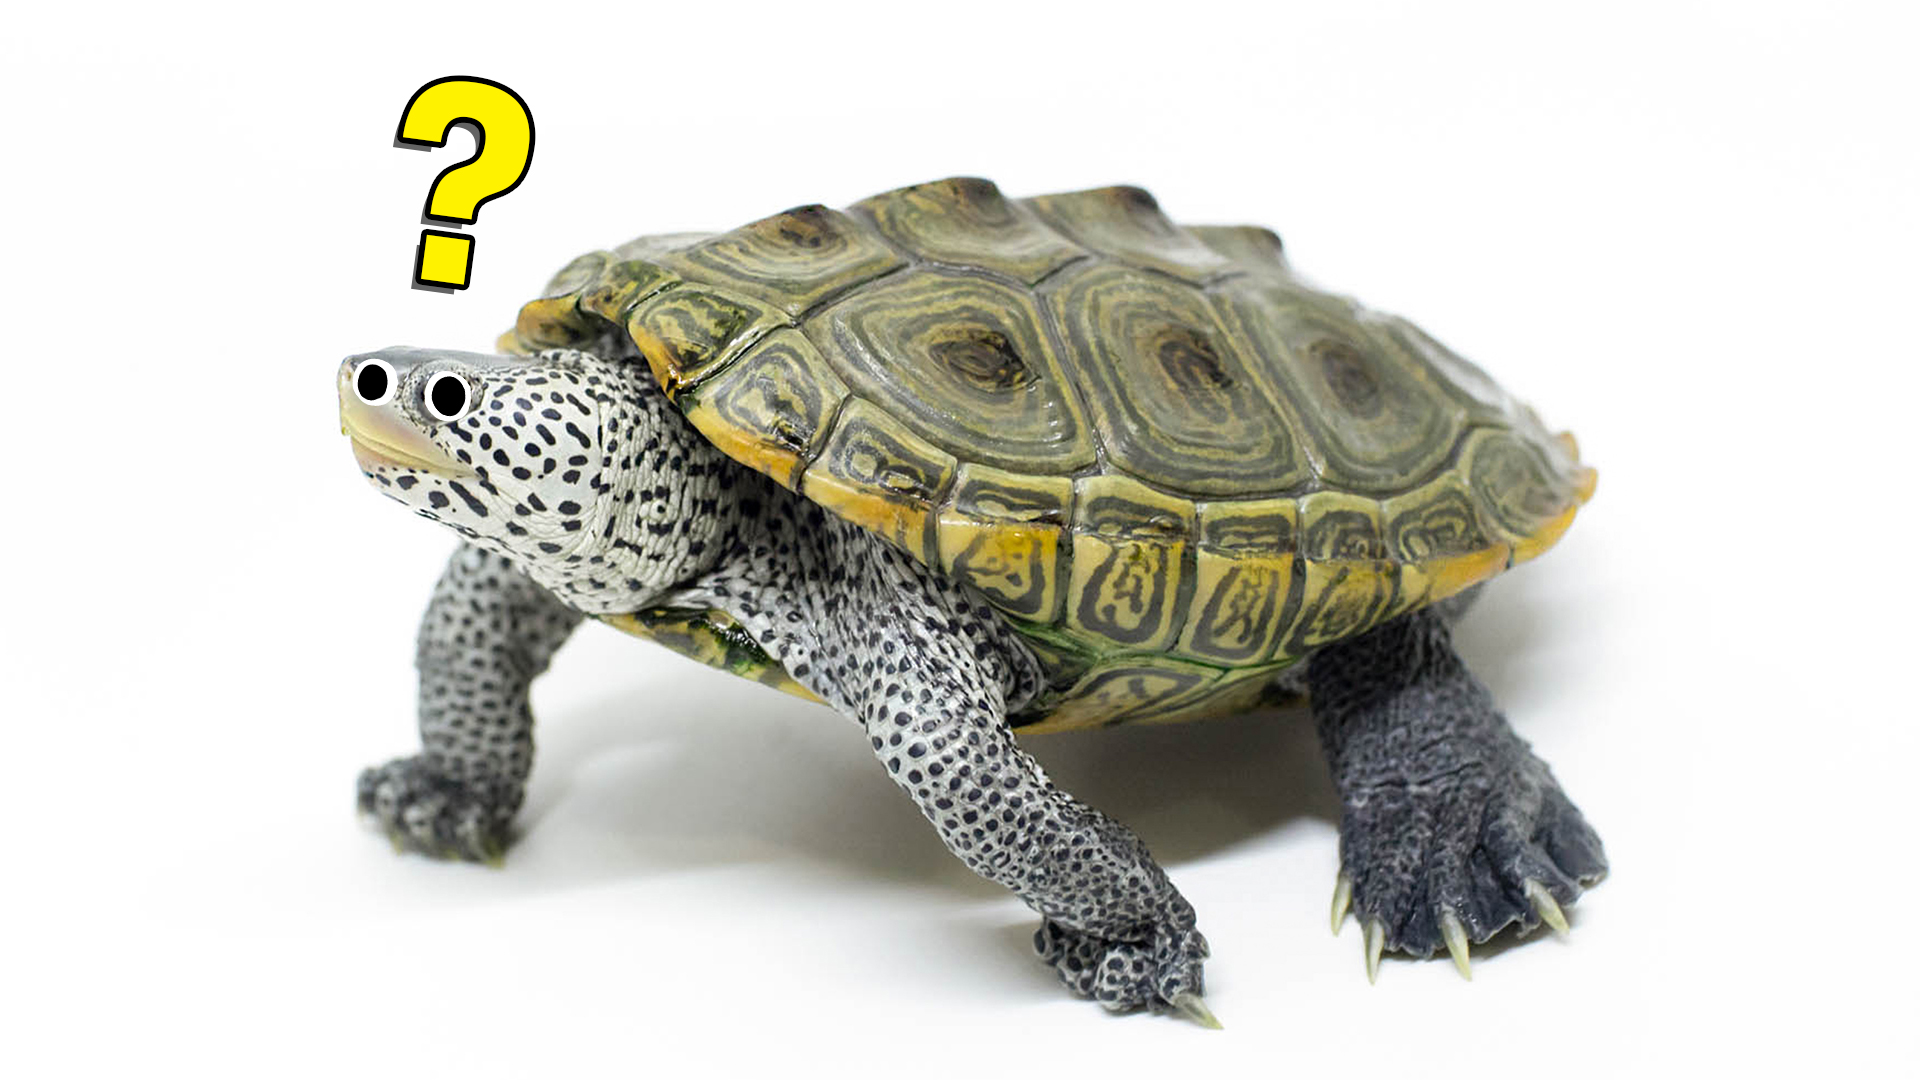 A confused terrapin